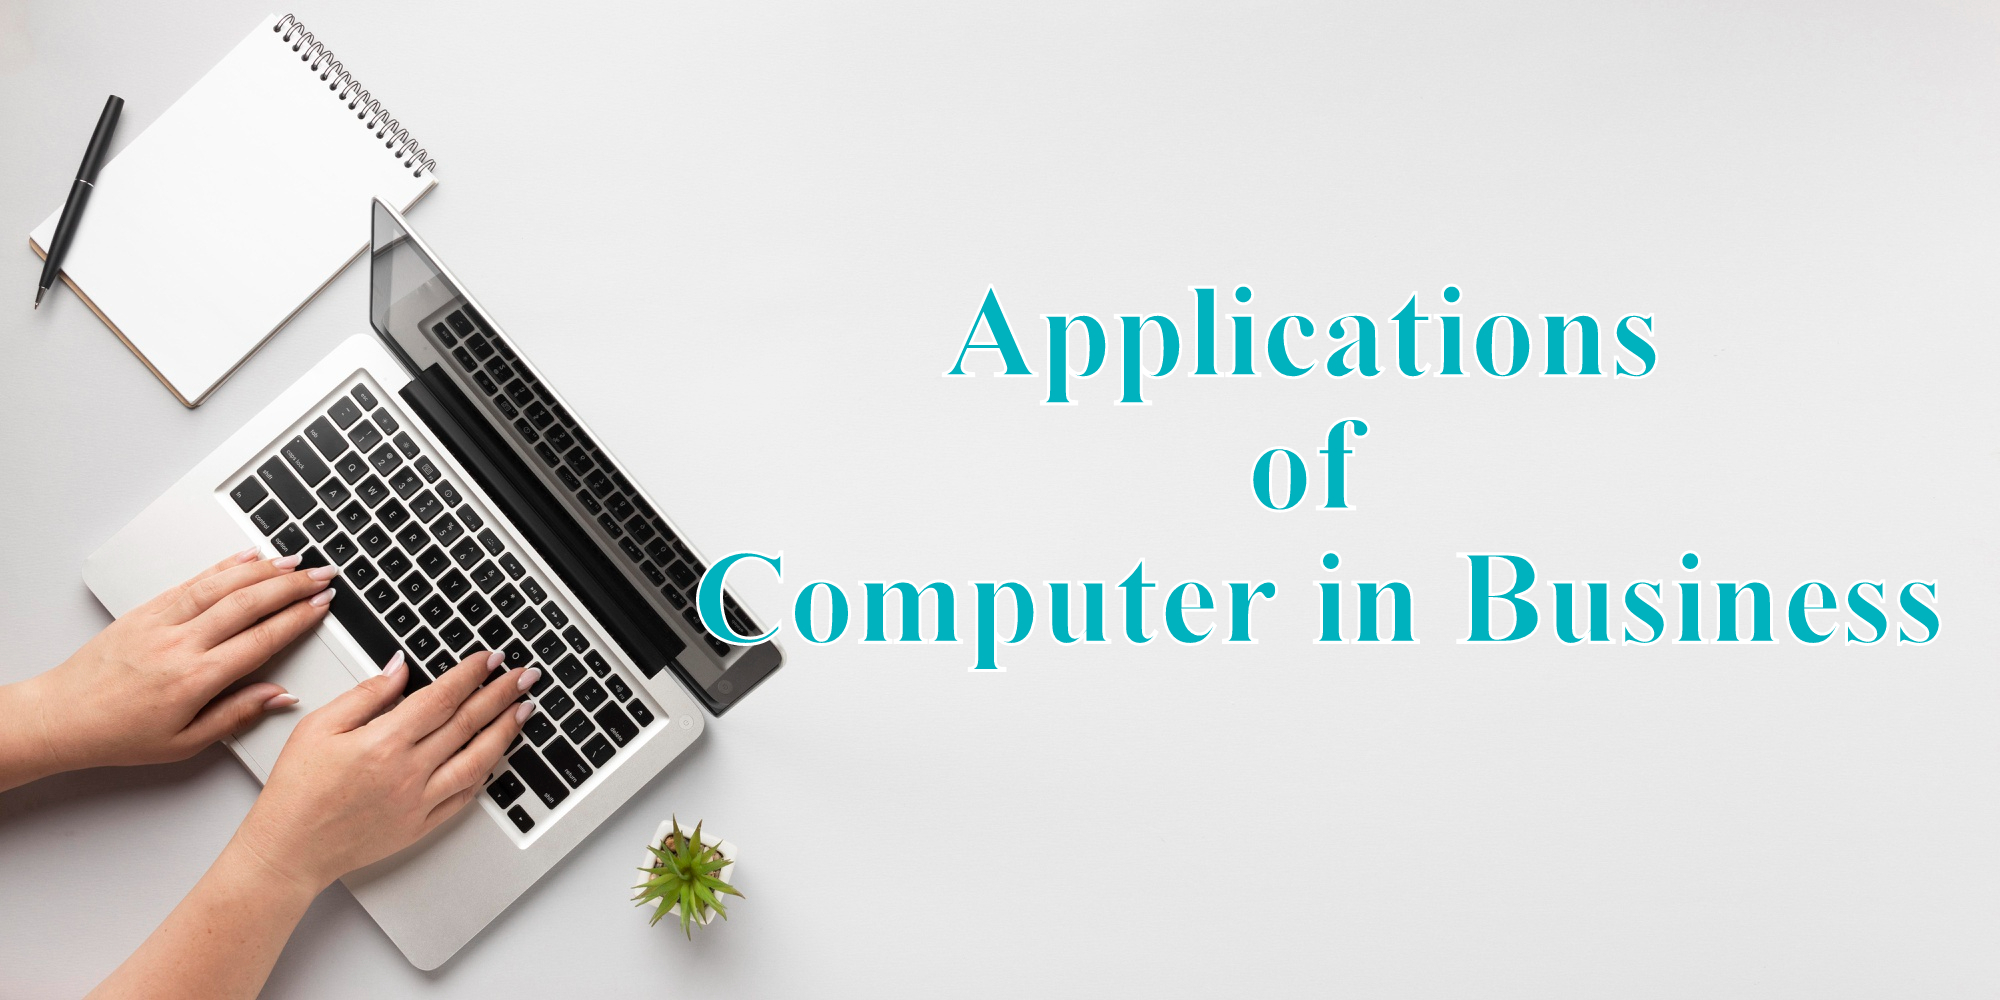 Applications of Computer in Business/ Uses of Computer in Business